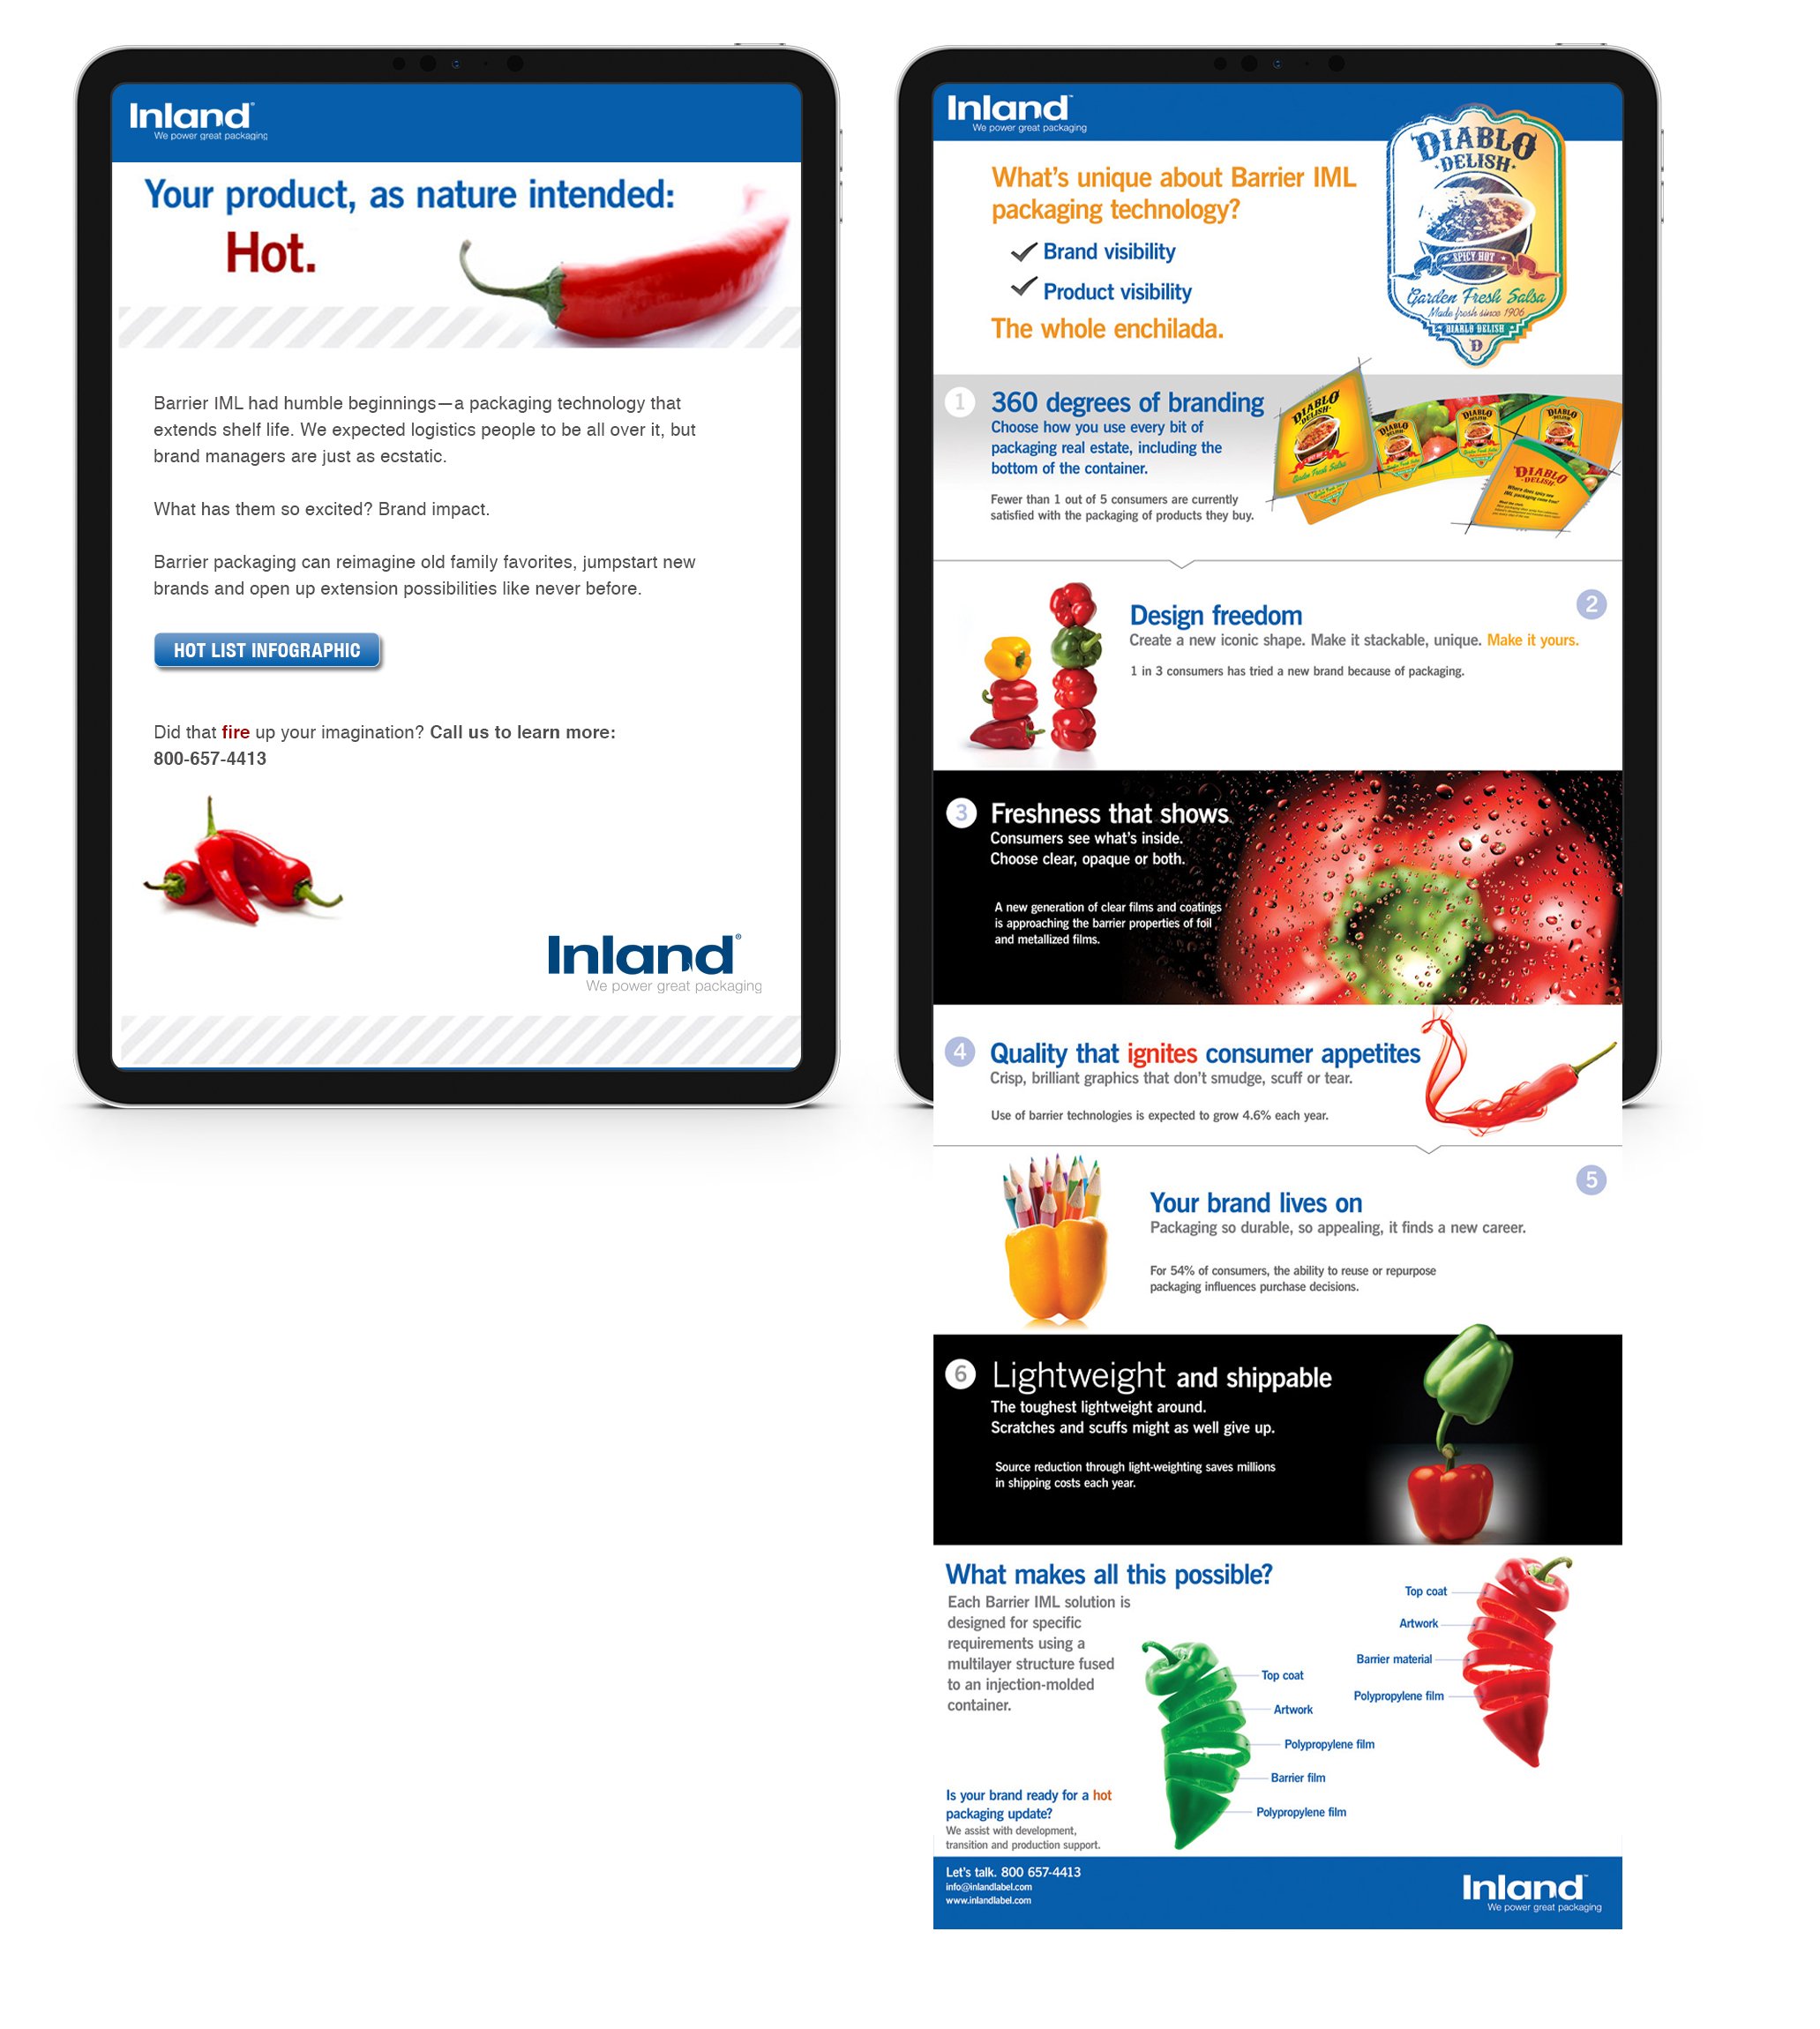 Examples of infographics Vendi Advertising created for Inland Packaging